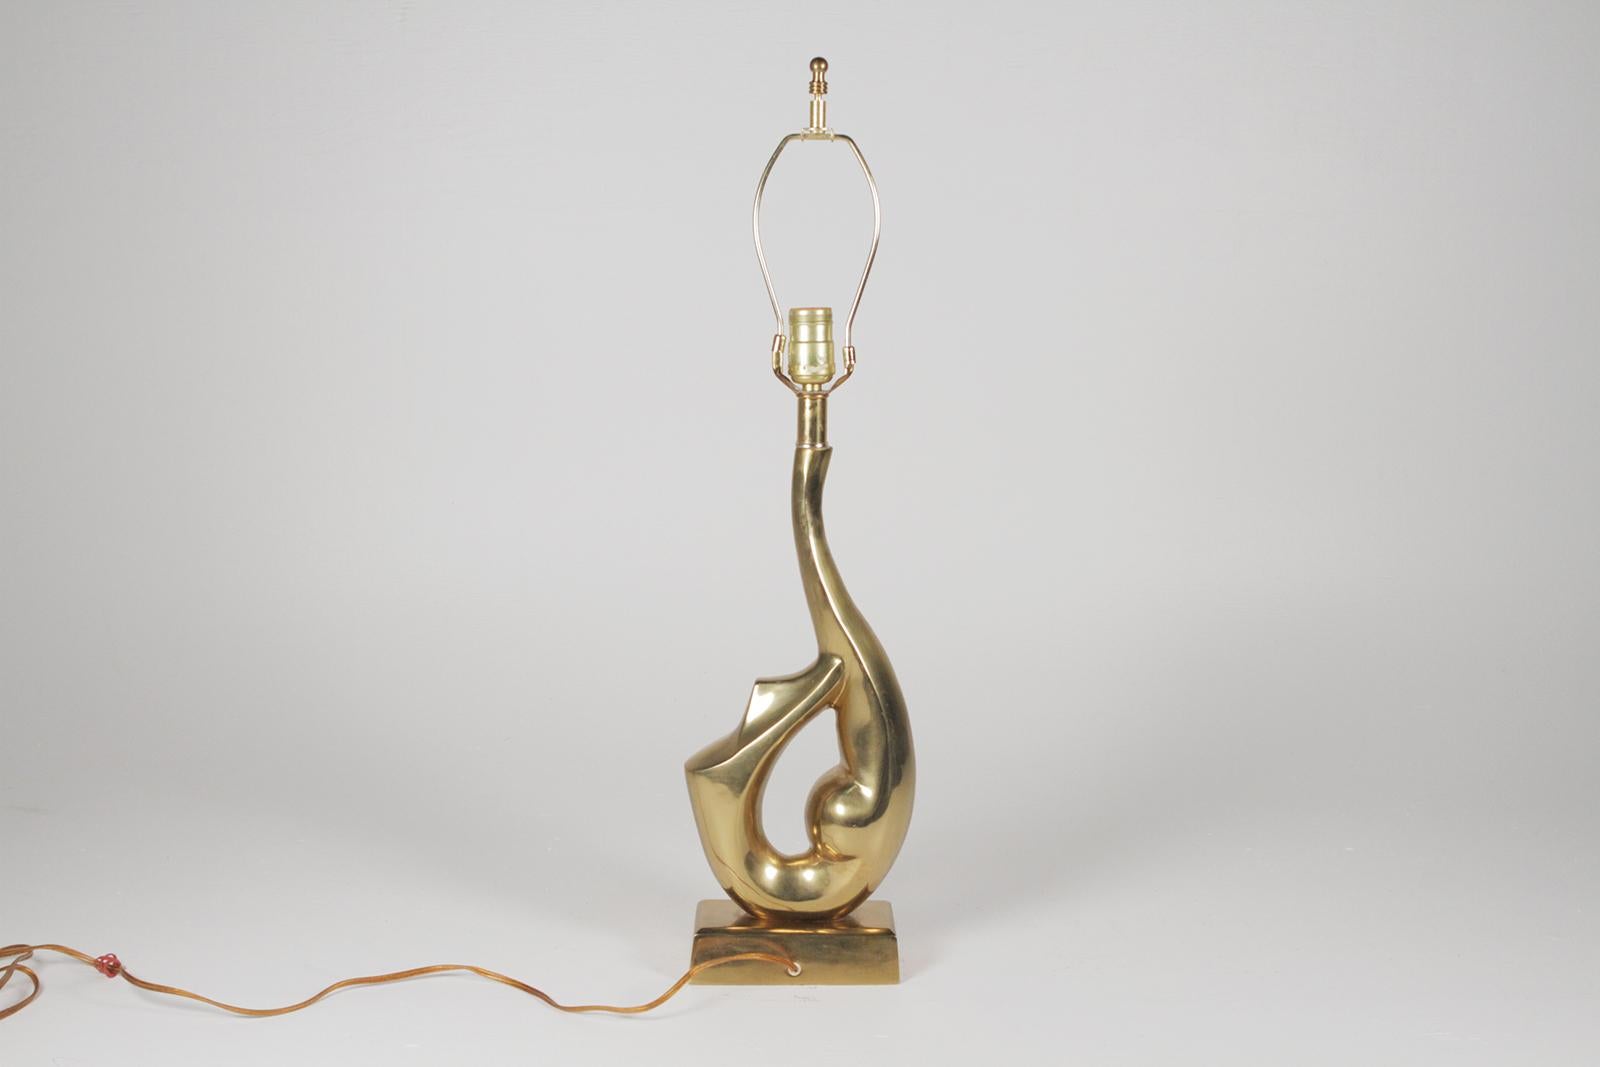 American Midcentury Brass Lamp in the Form of a Swimmer For Sale